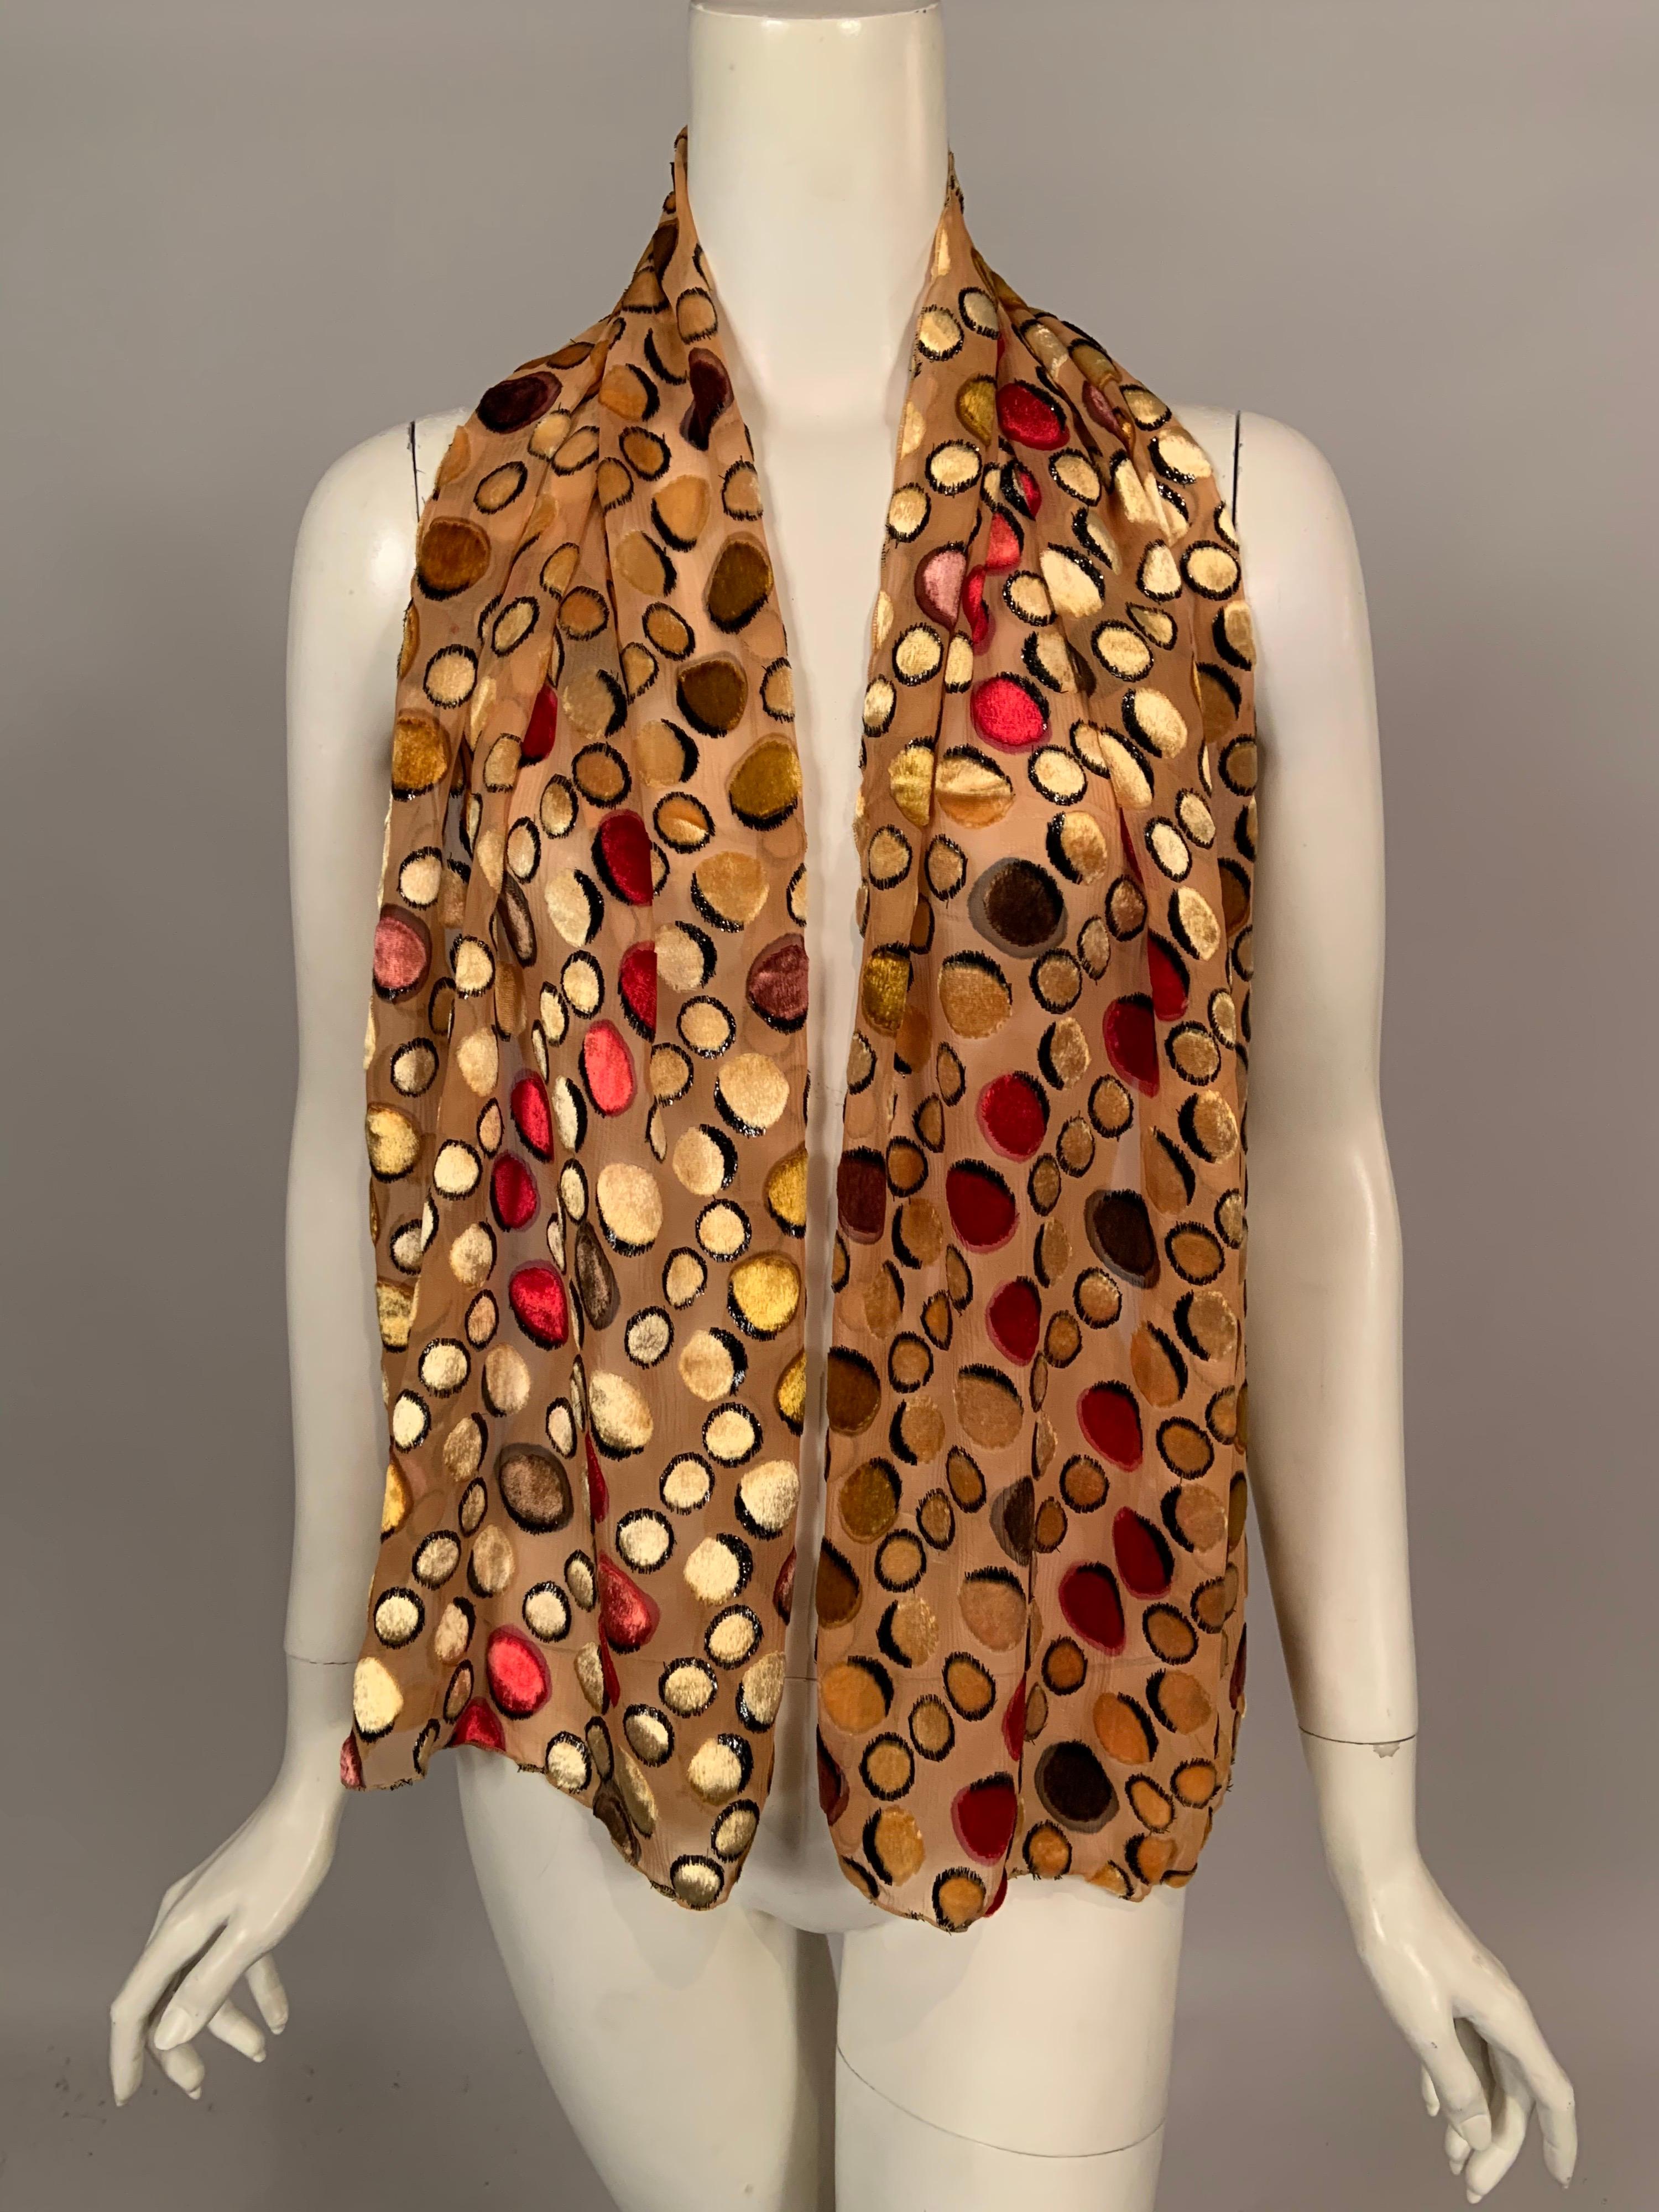 Gold silk georgette is covered with velvet dots or circles of varying sizes in yellow, rose, gold red and brown with black highlights. The shawl is both elegant and whimsical and it is in excellent condition.
Measurements;
Length 58